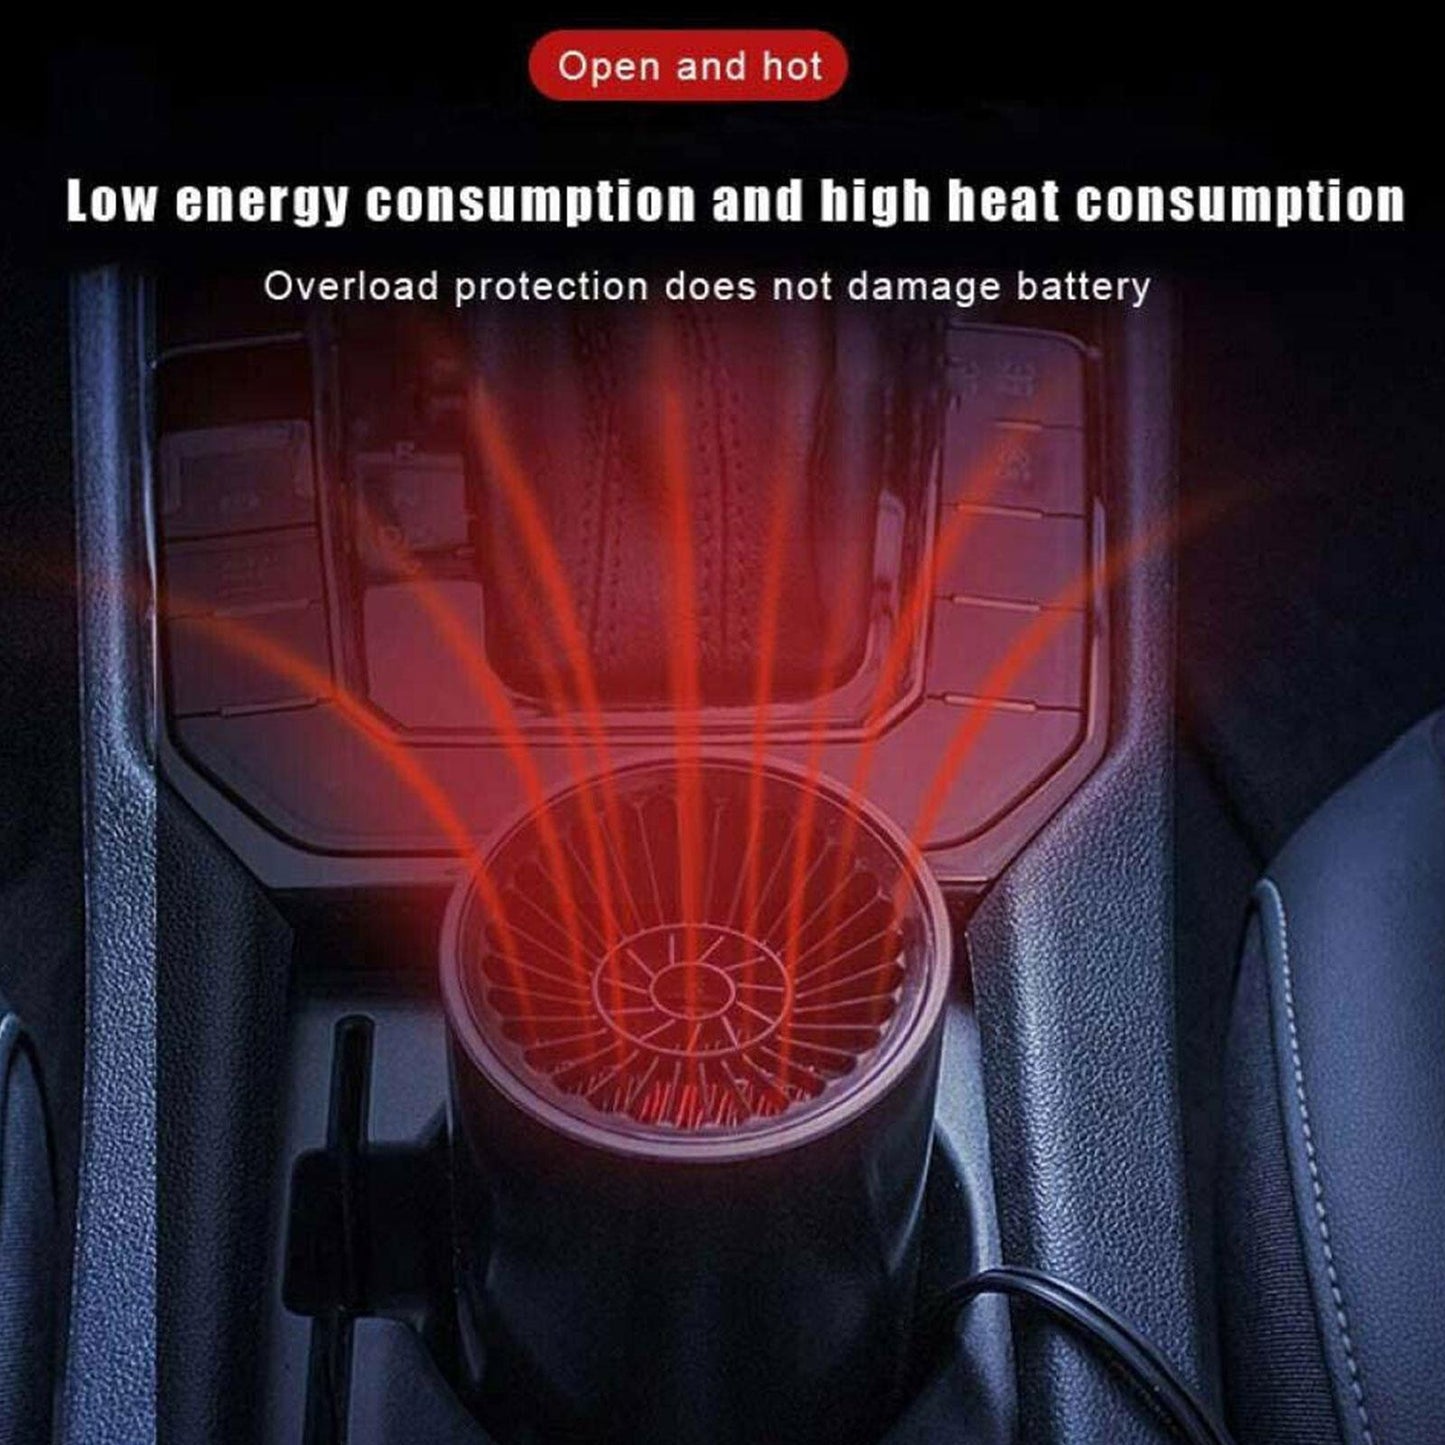 Portable Heater For Car  Windshield